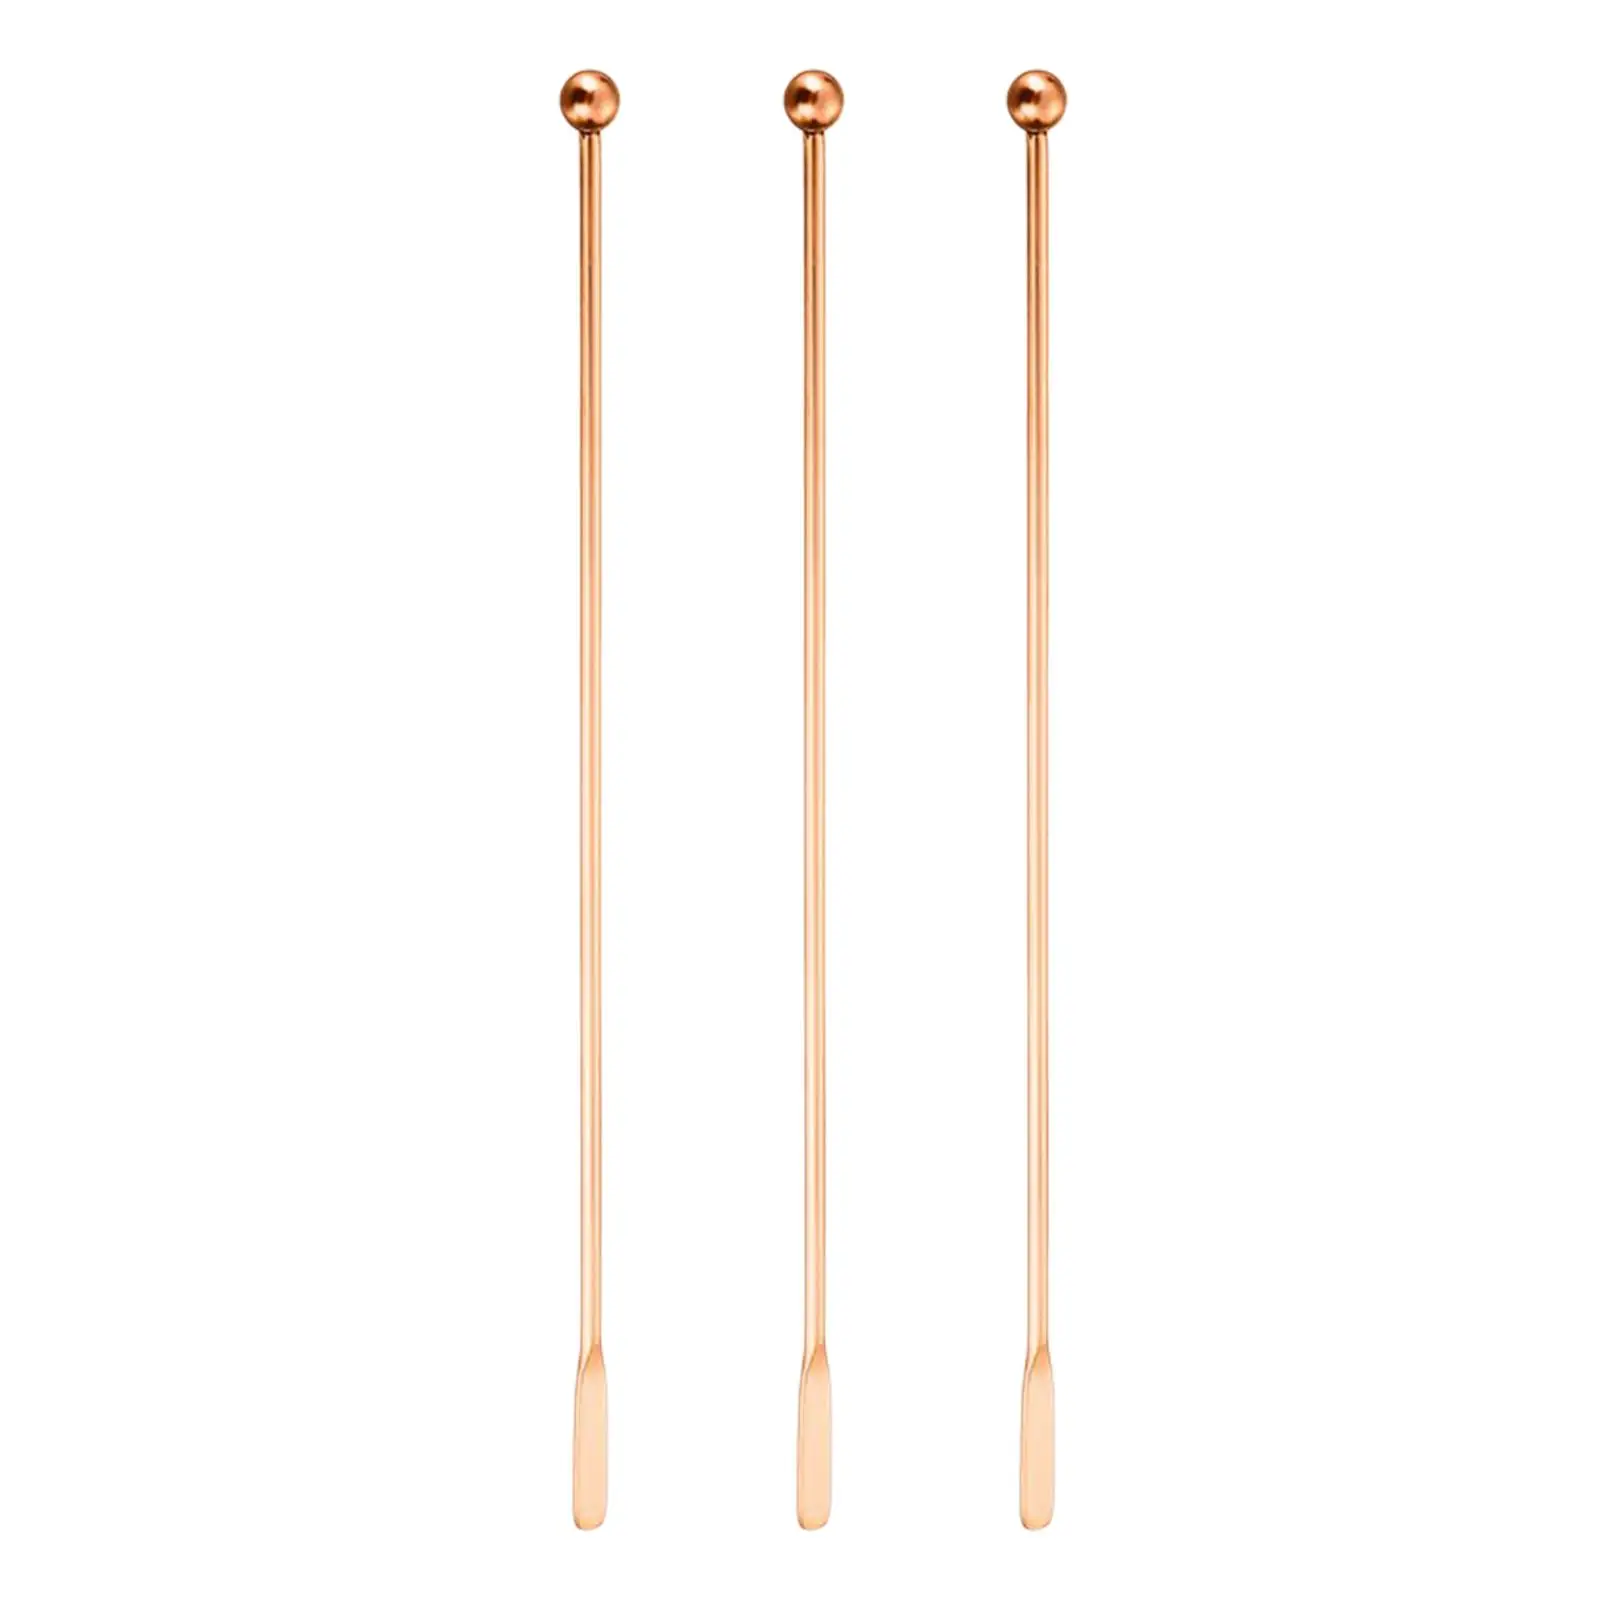 3x Stainless Steel Cocktail Stirrers Brewing Paddle with Long Handle Stirring Paddle Long Stirrer for Home Bar Cocktail